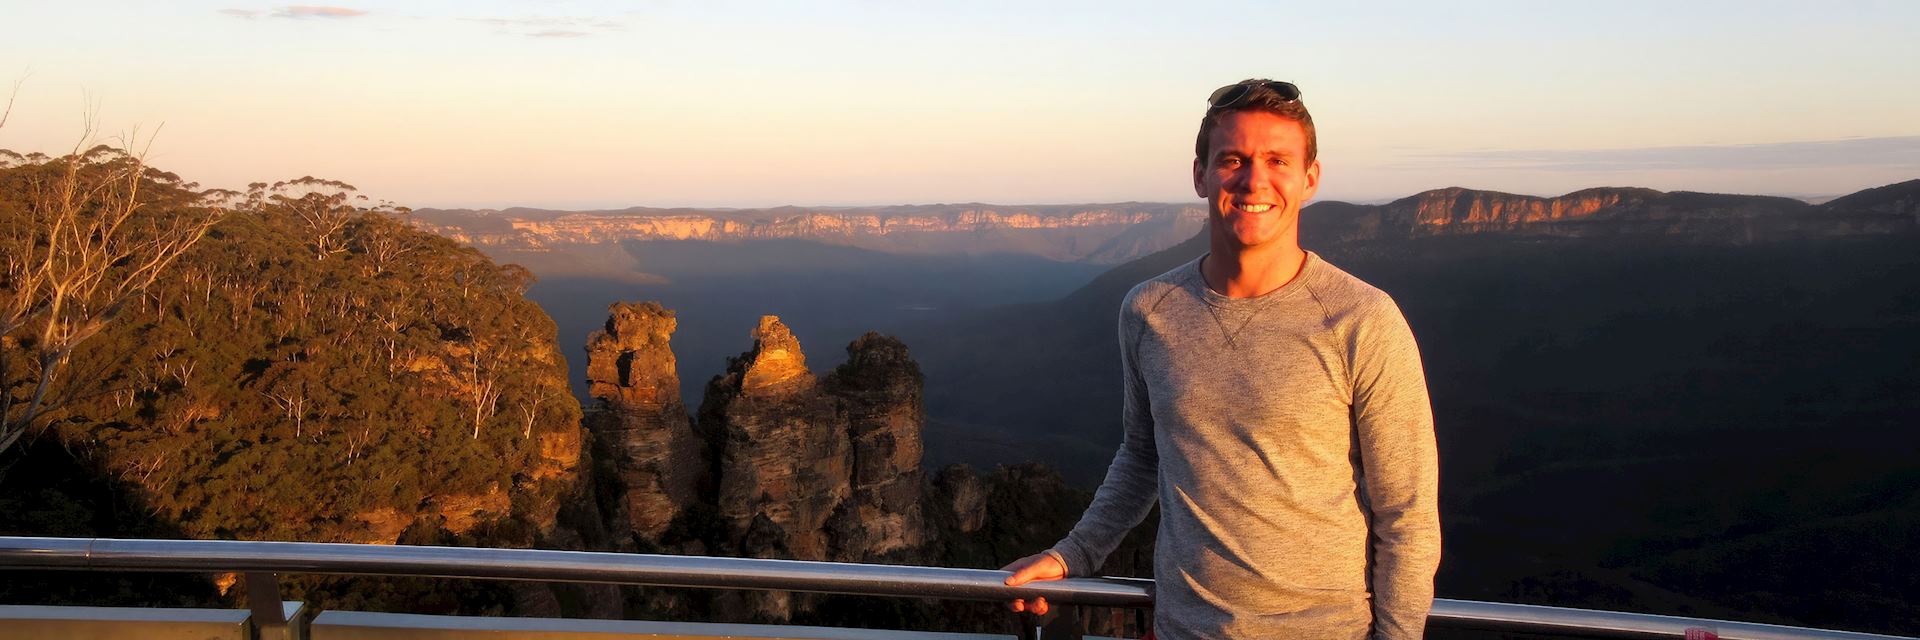 Joshua at The Three Sisters in the Blue Mountains, Australia